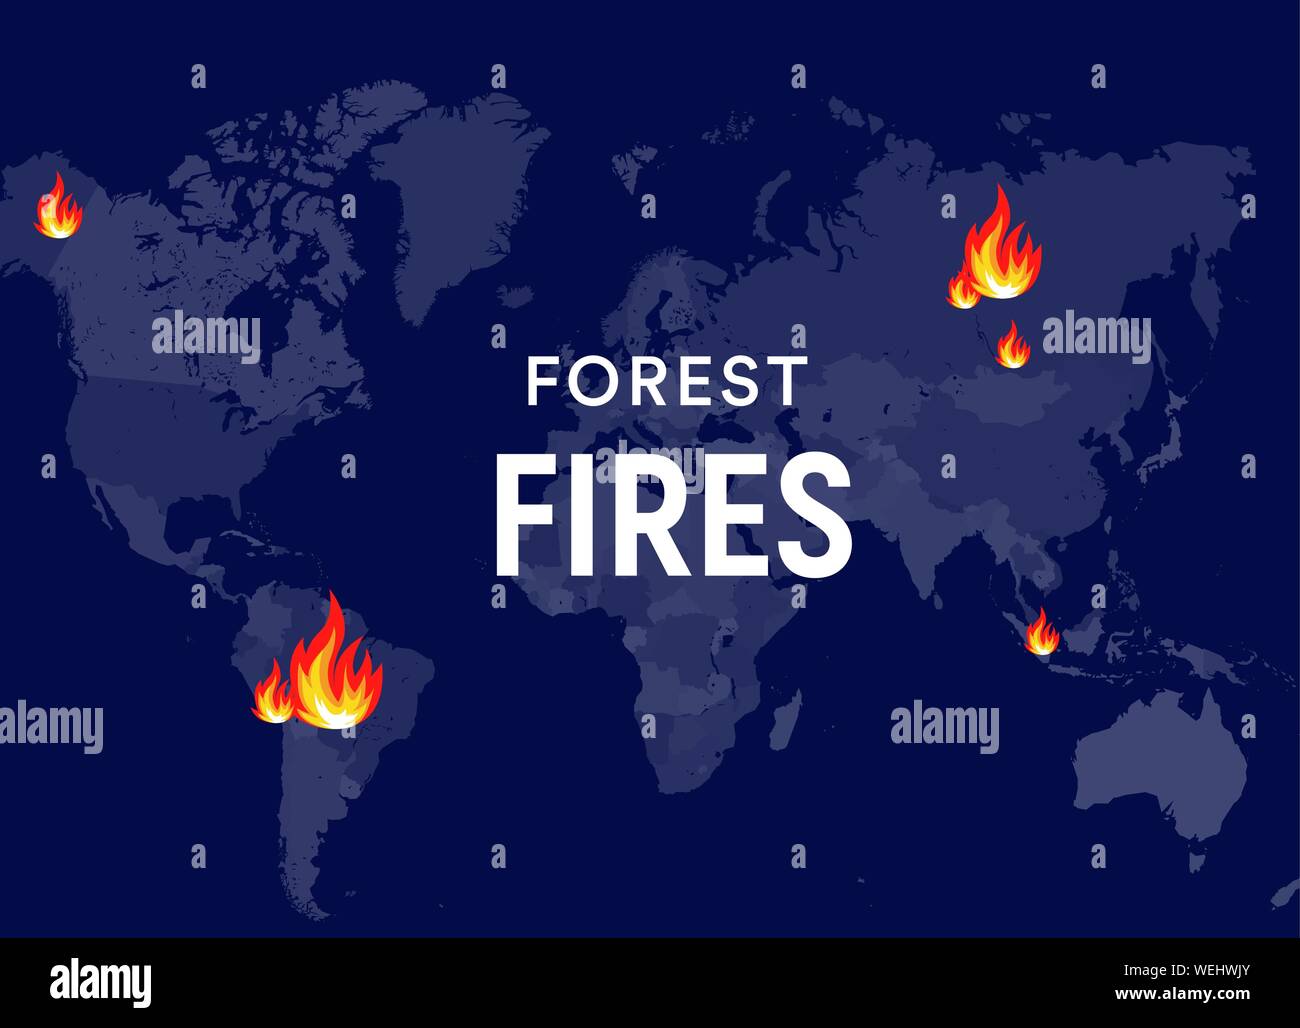 Breaking News bushfires Poster concept. Fires places on world map, forest fires centres. Banner design template for news, social media or web. Vector Stock Vector